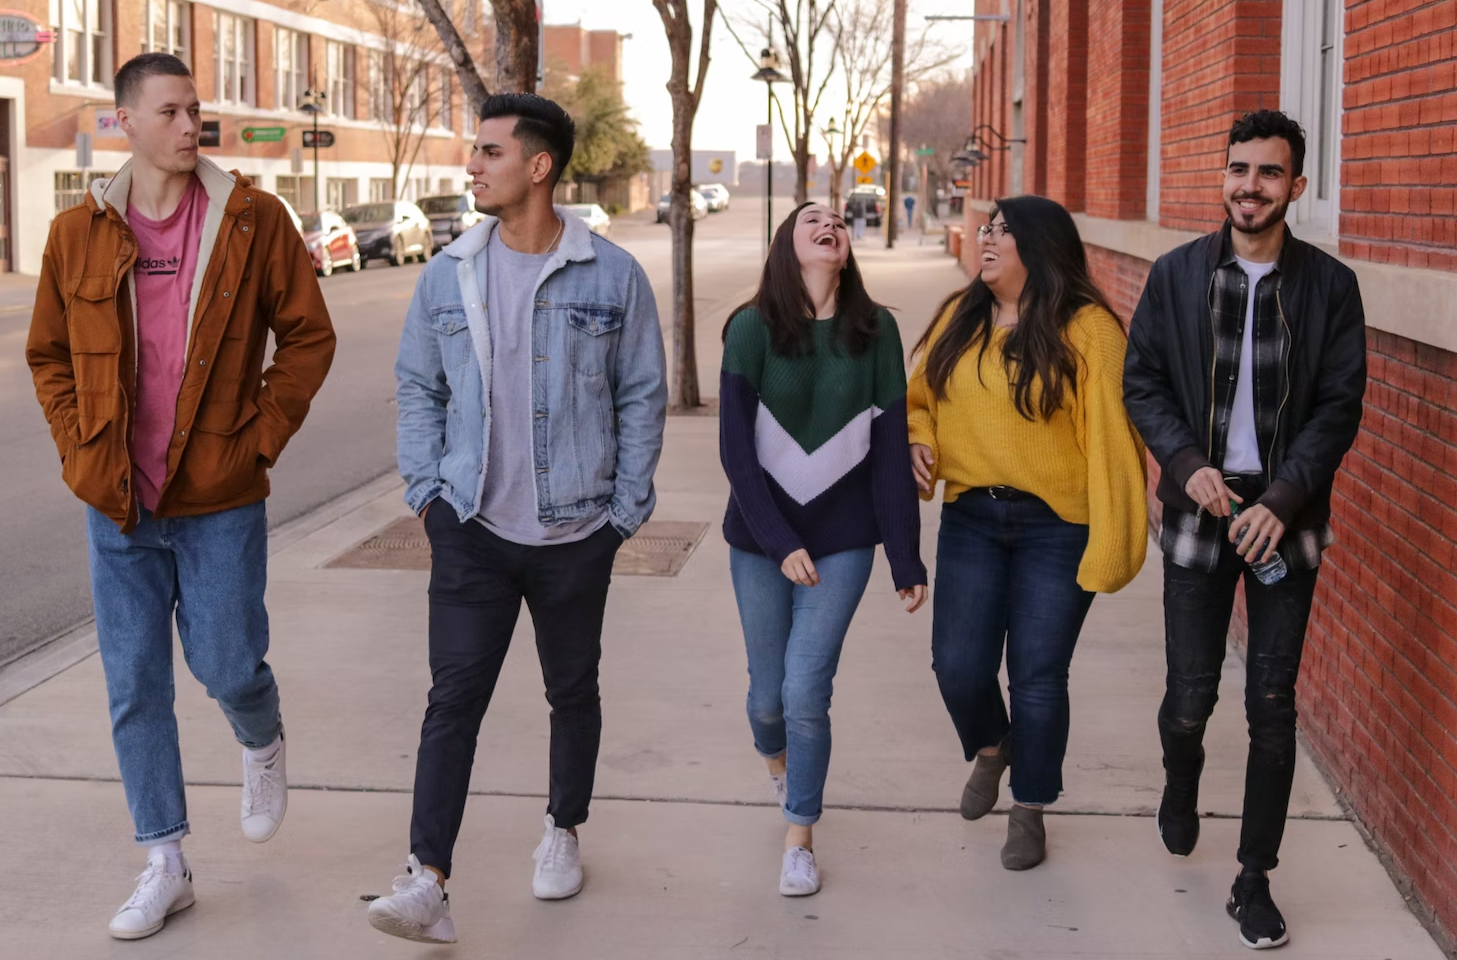 5 young people walking together